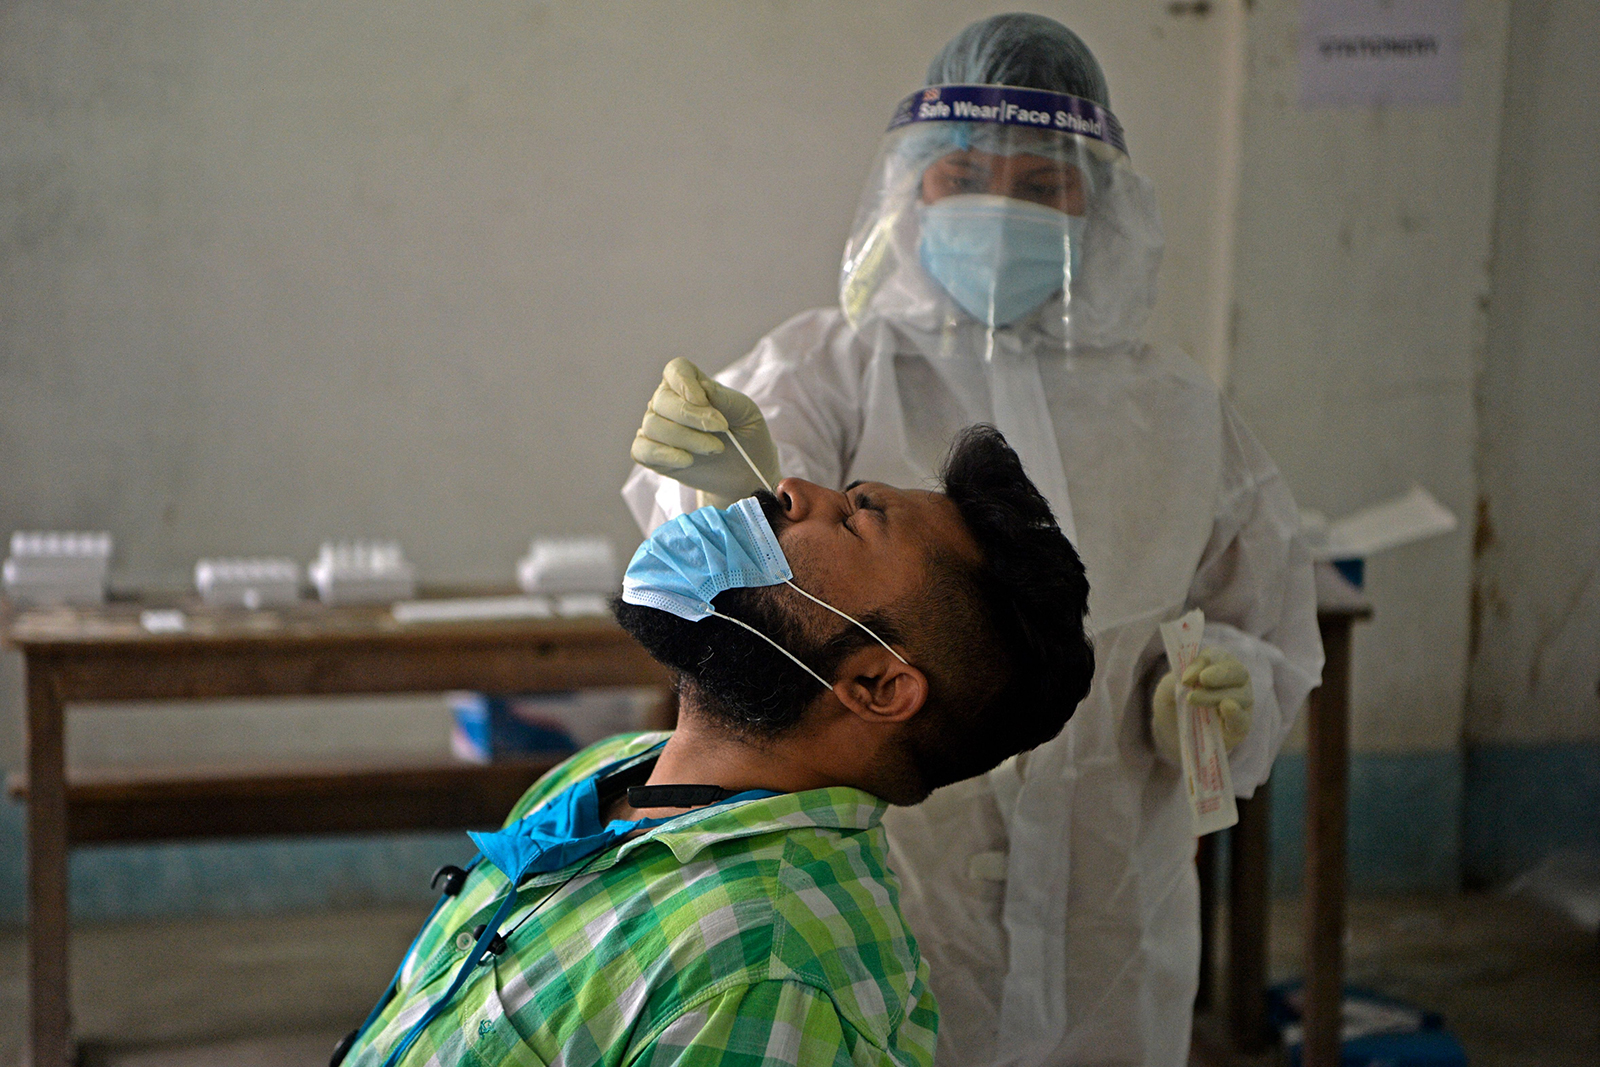 A health worker collects a nasal swab sample at Siliguri college in Siliguri, India, on April 30.